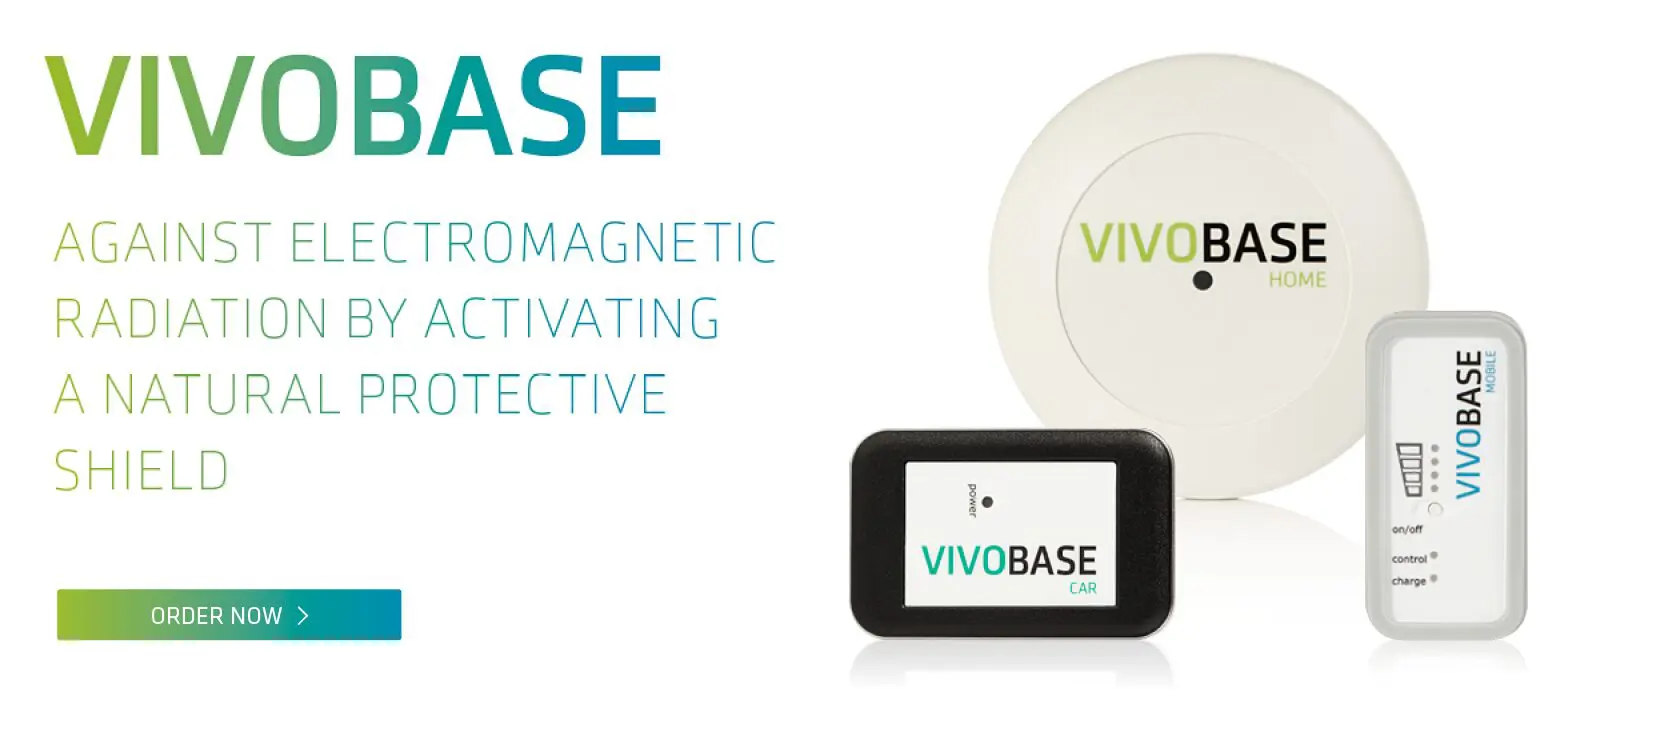 A picture of the vivobase device and its packaging.